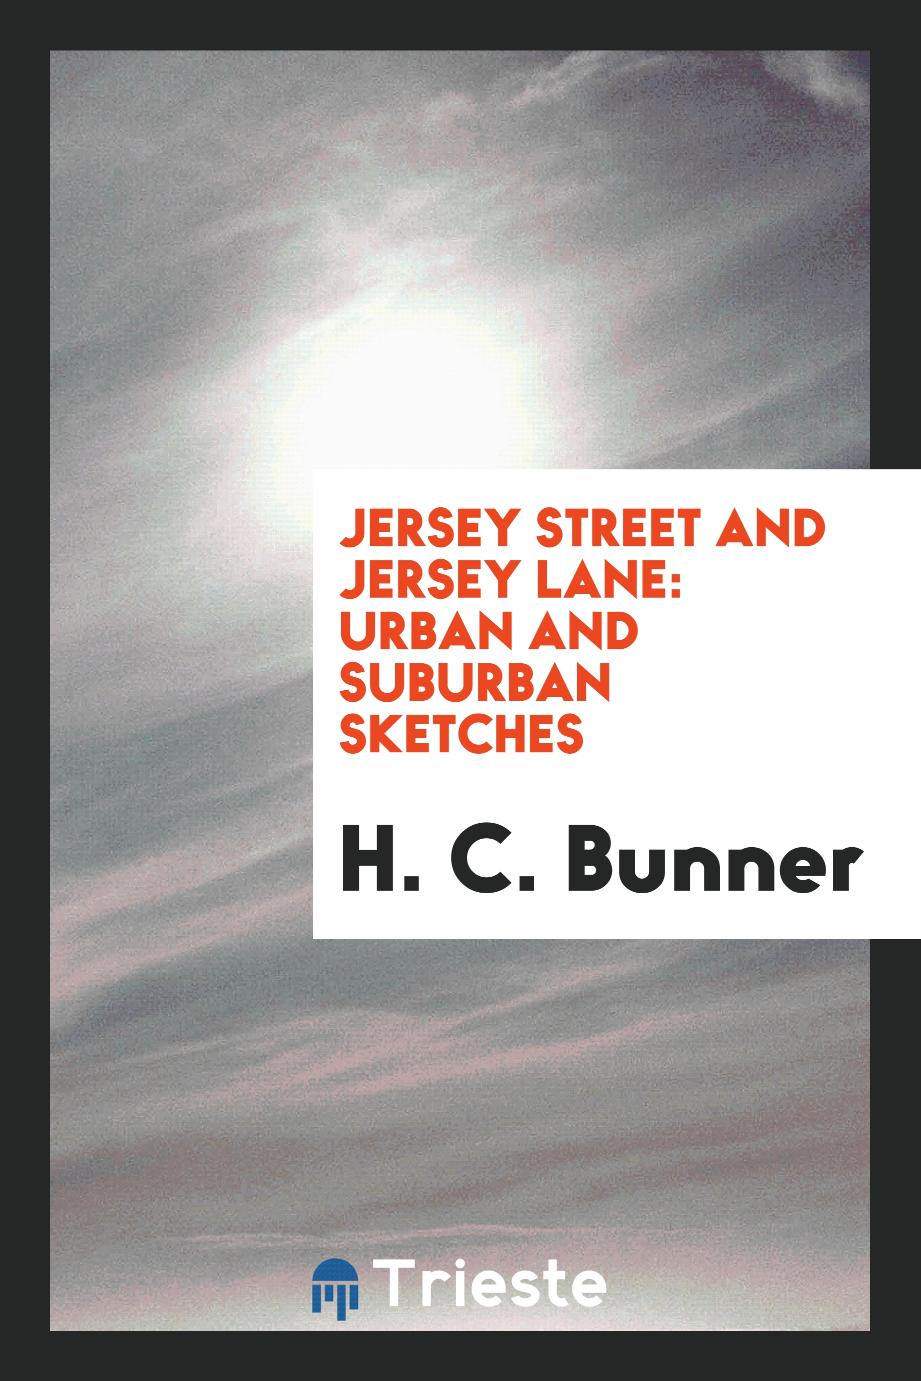 Jersey street and Jersey lane: urban and suburban sketches